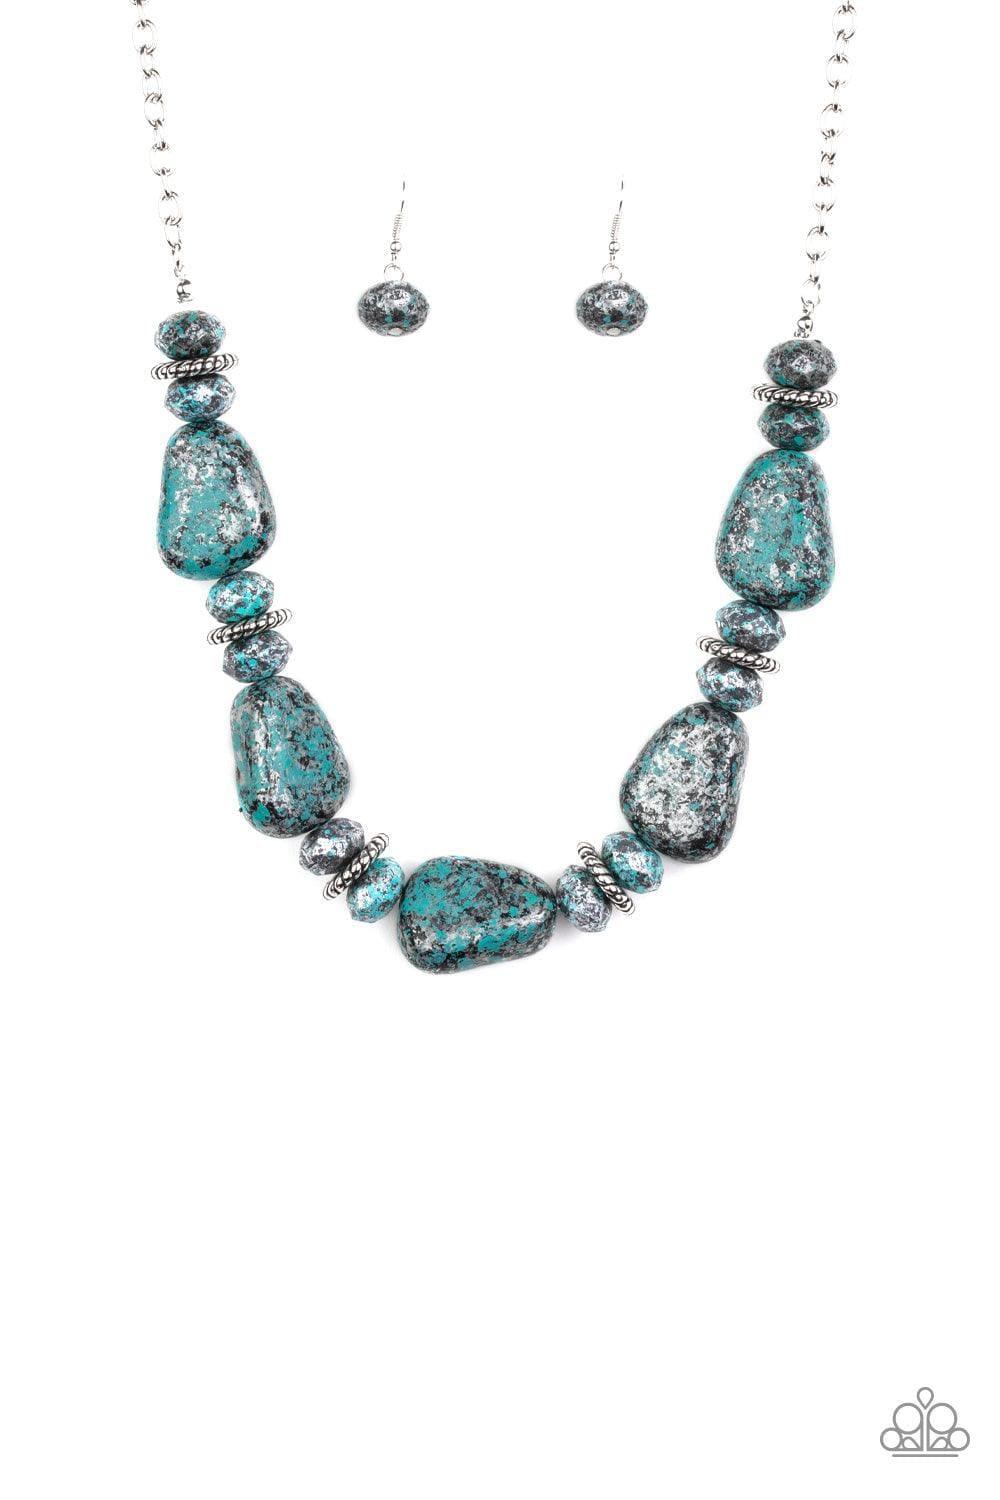 Paparazzi Accessories - Prehistoric Fashionista - Blue Necklace - Bling by JessieK